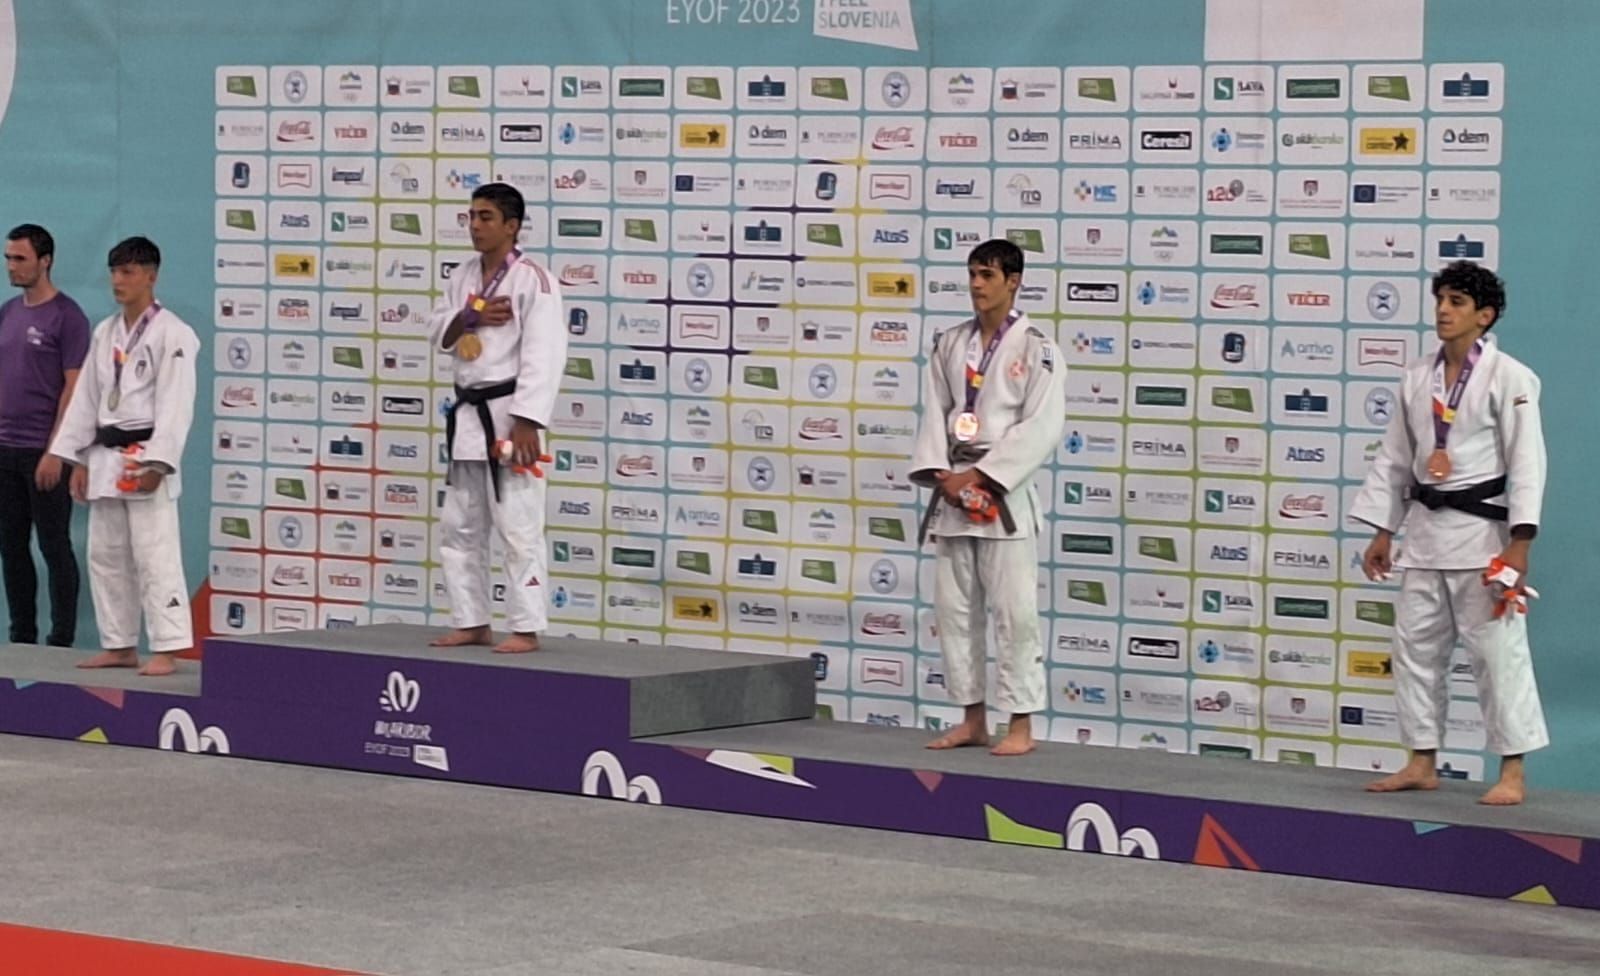 National judokas win medals at European Youth Olympic Festival [PHOTOS]